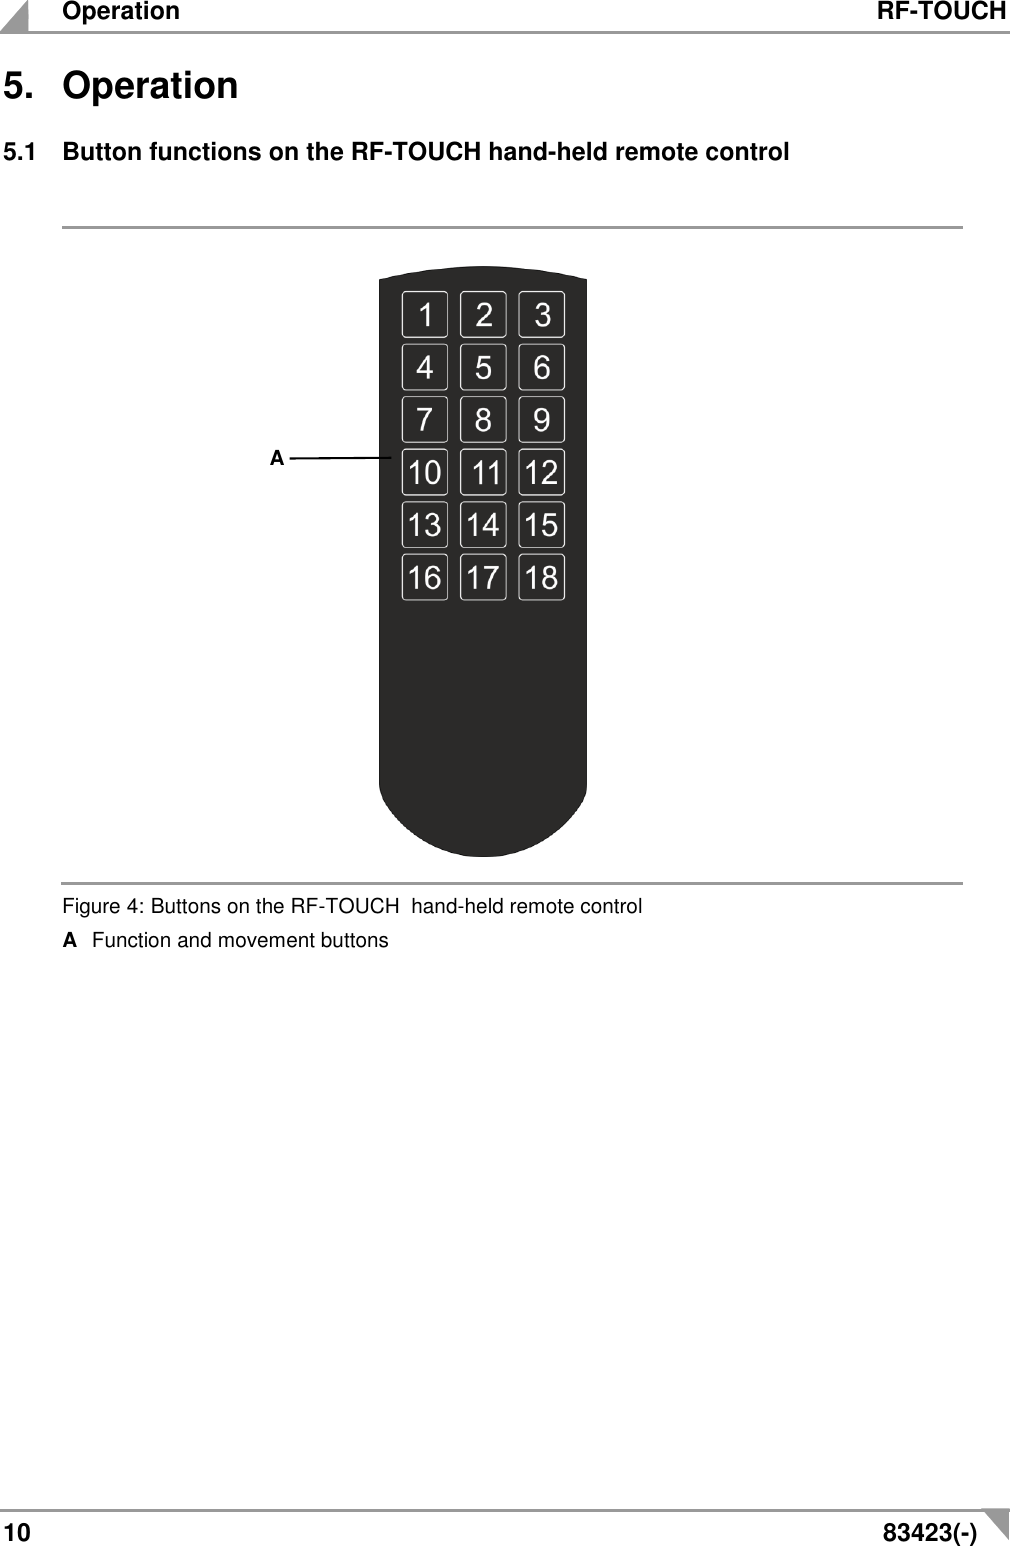   Operation  RF-TOUCH 10  83423(-) 5.  Operation 5.1  Button functions on the RF-TOUCH hand-held remote control   Figure 4: Buttons on the RF-TOUCH  hand-held remote control A  Function and movement buttons     A 